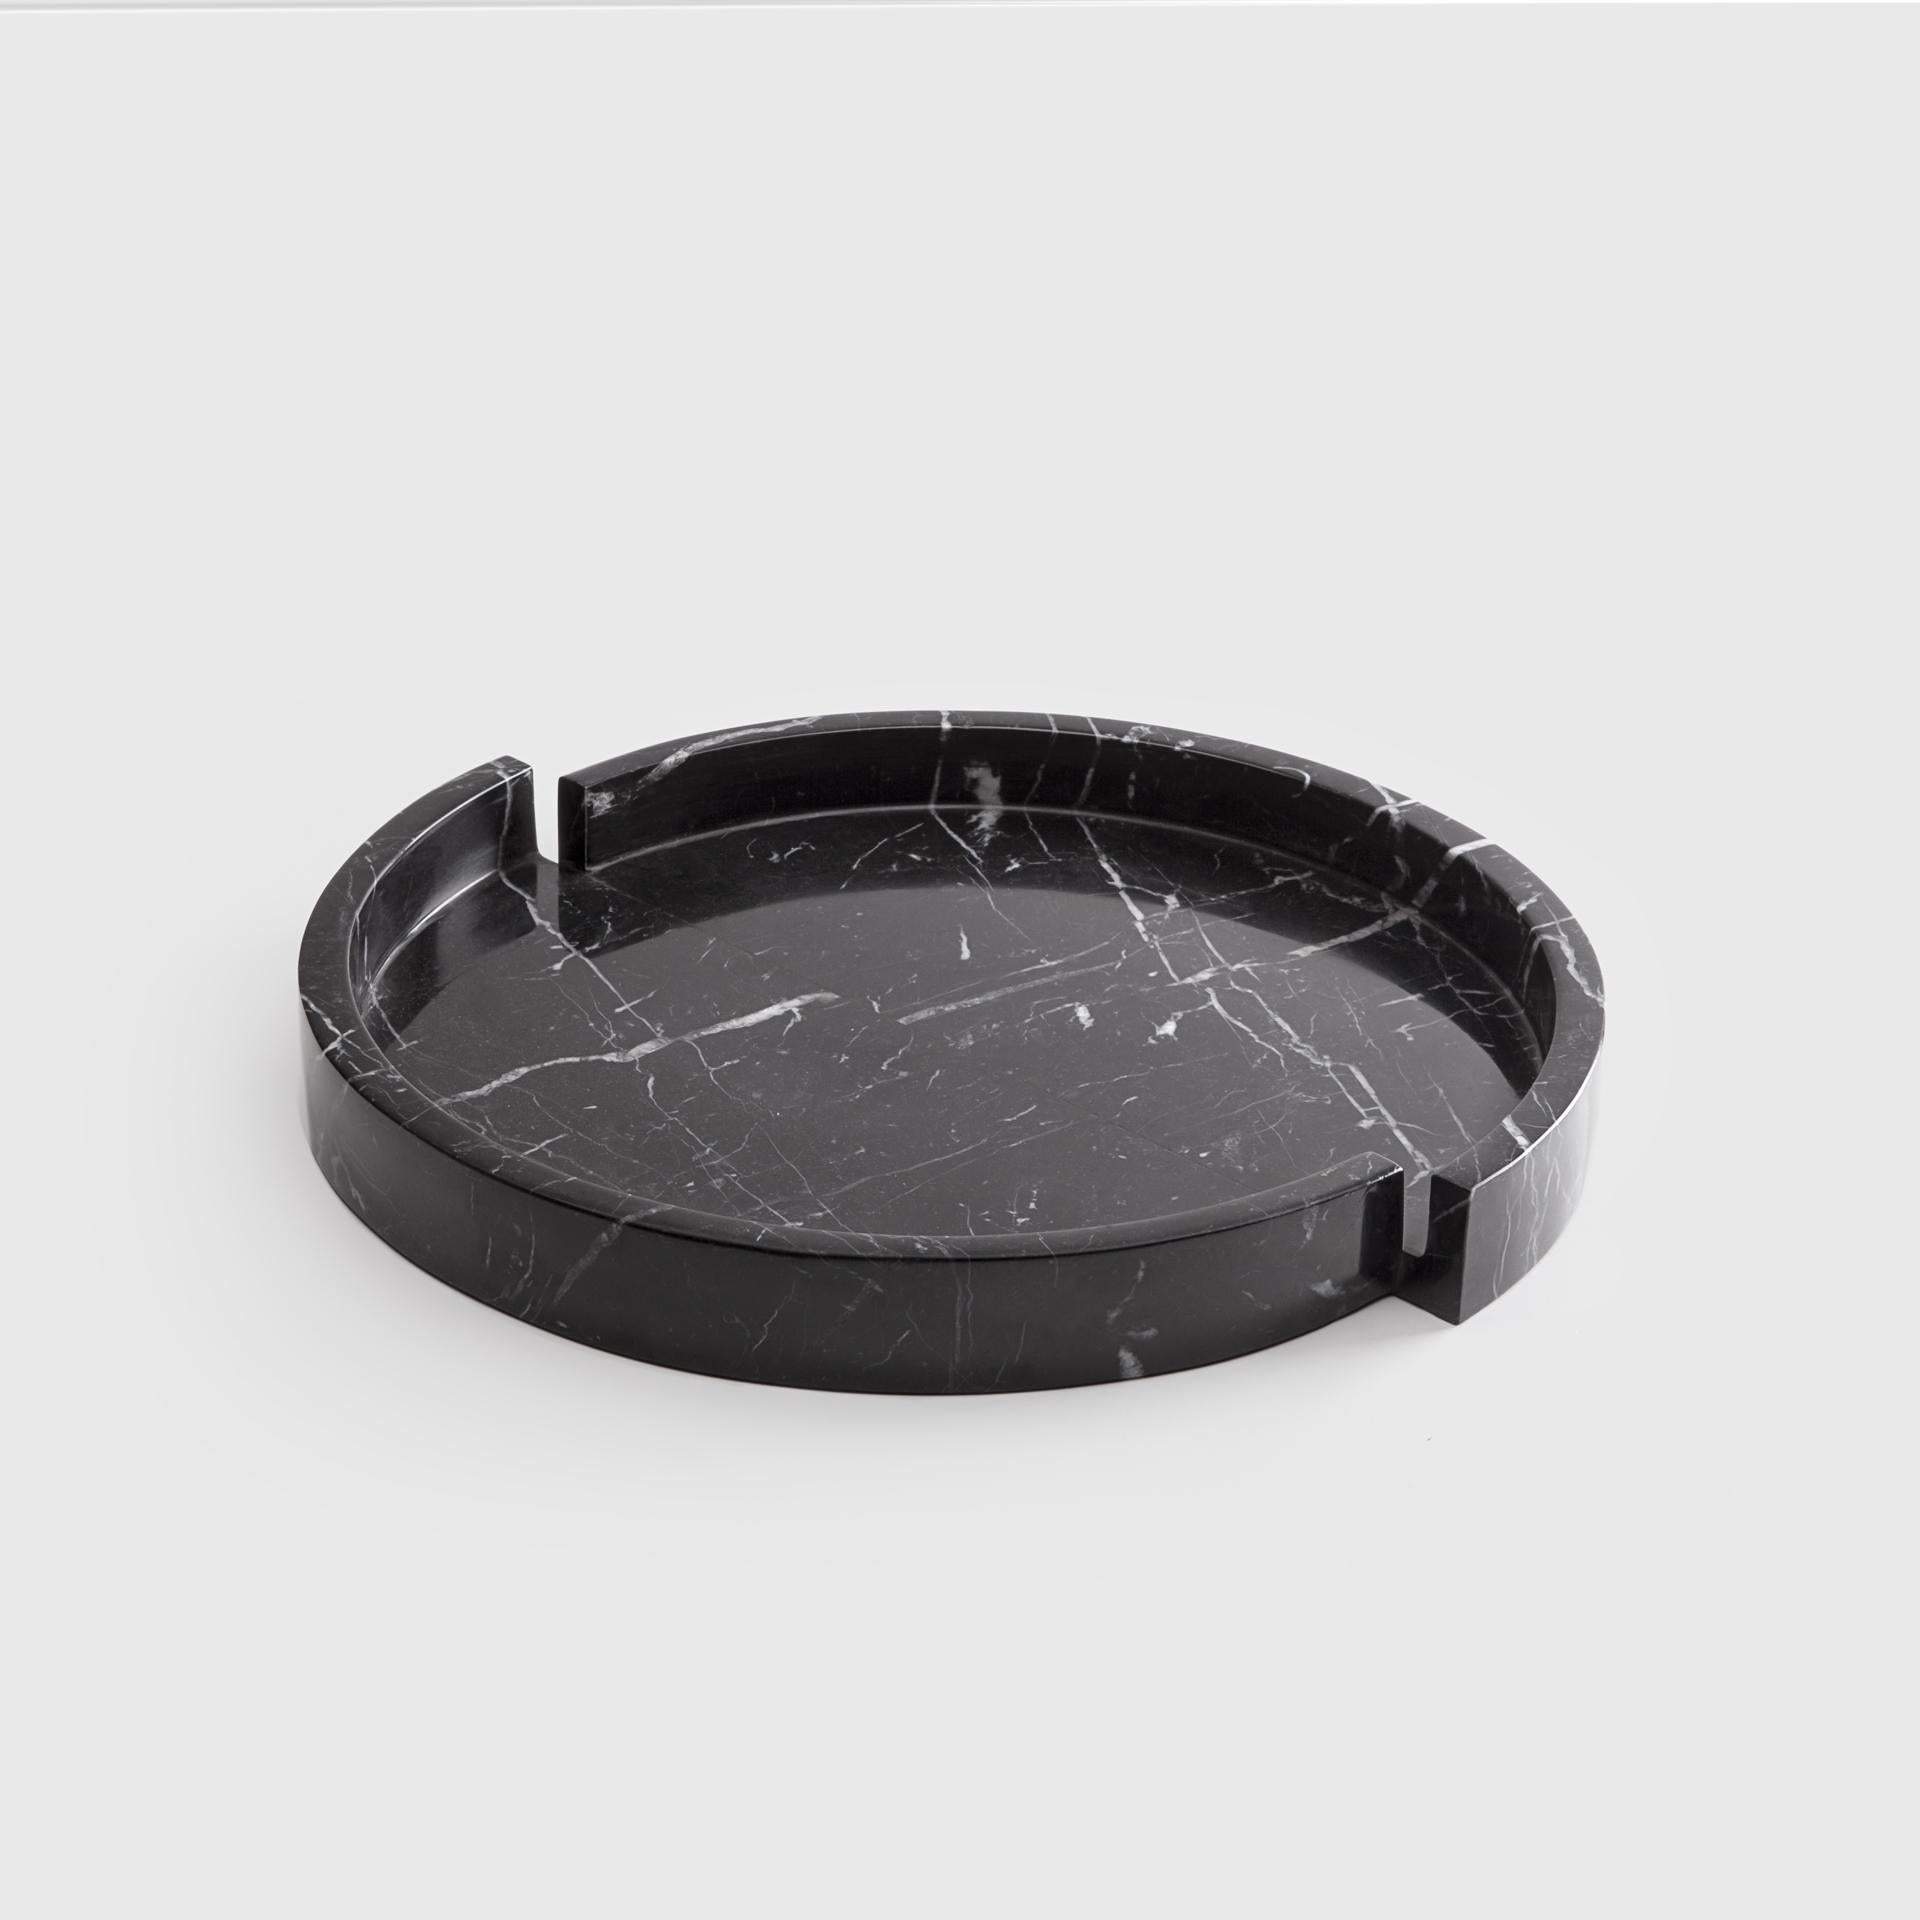 Italian Sculptural Minimalist Marble Bowl in Black Marble, Made in Italy by Sandro Lopez For Sale